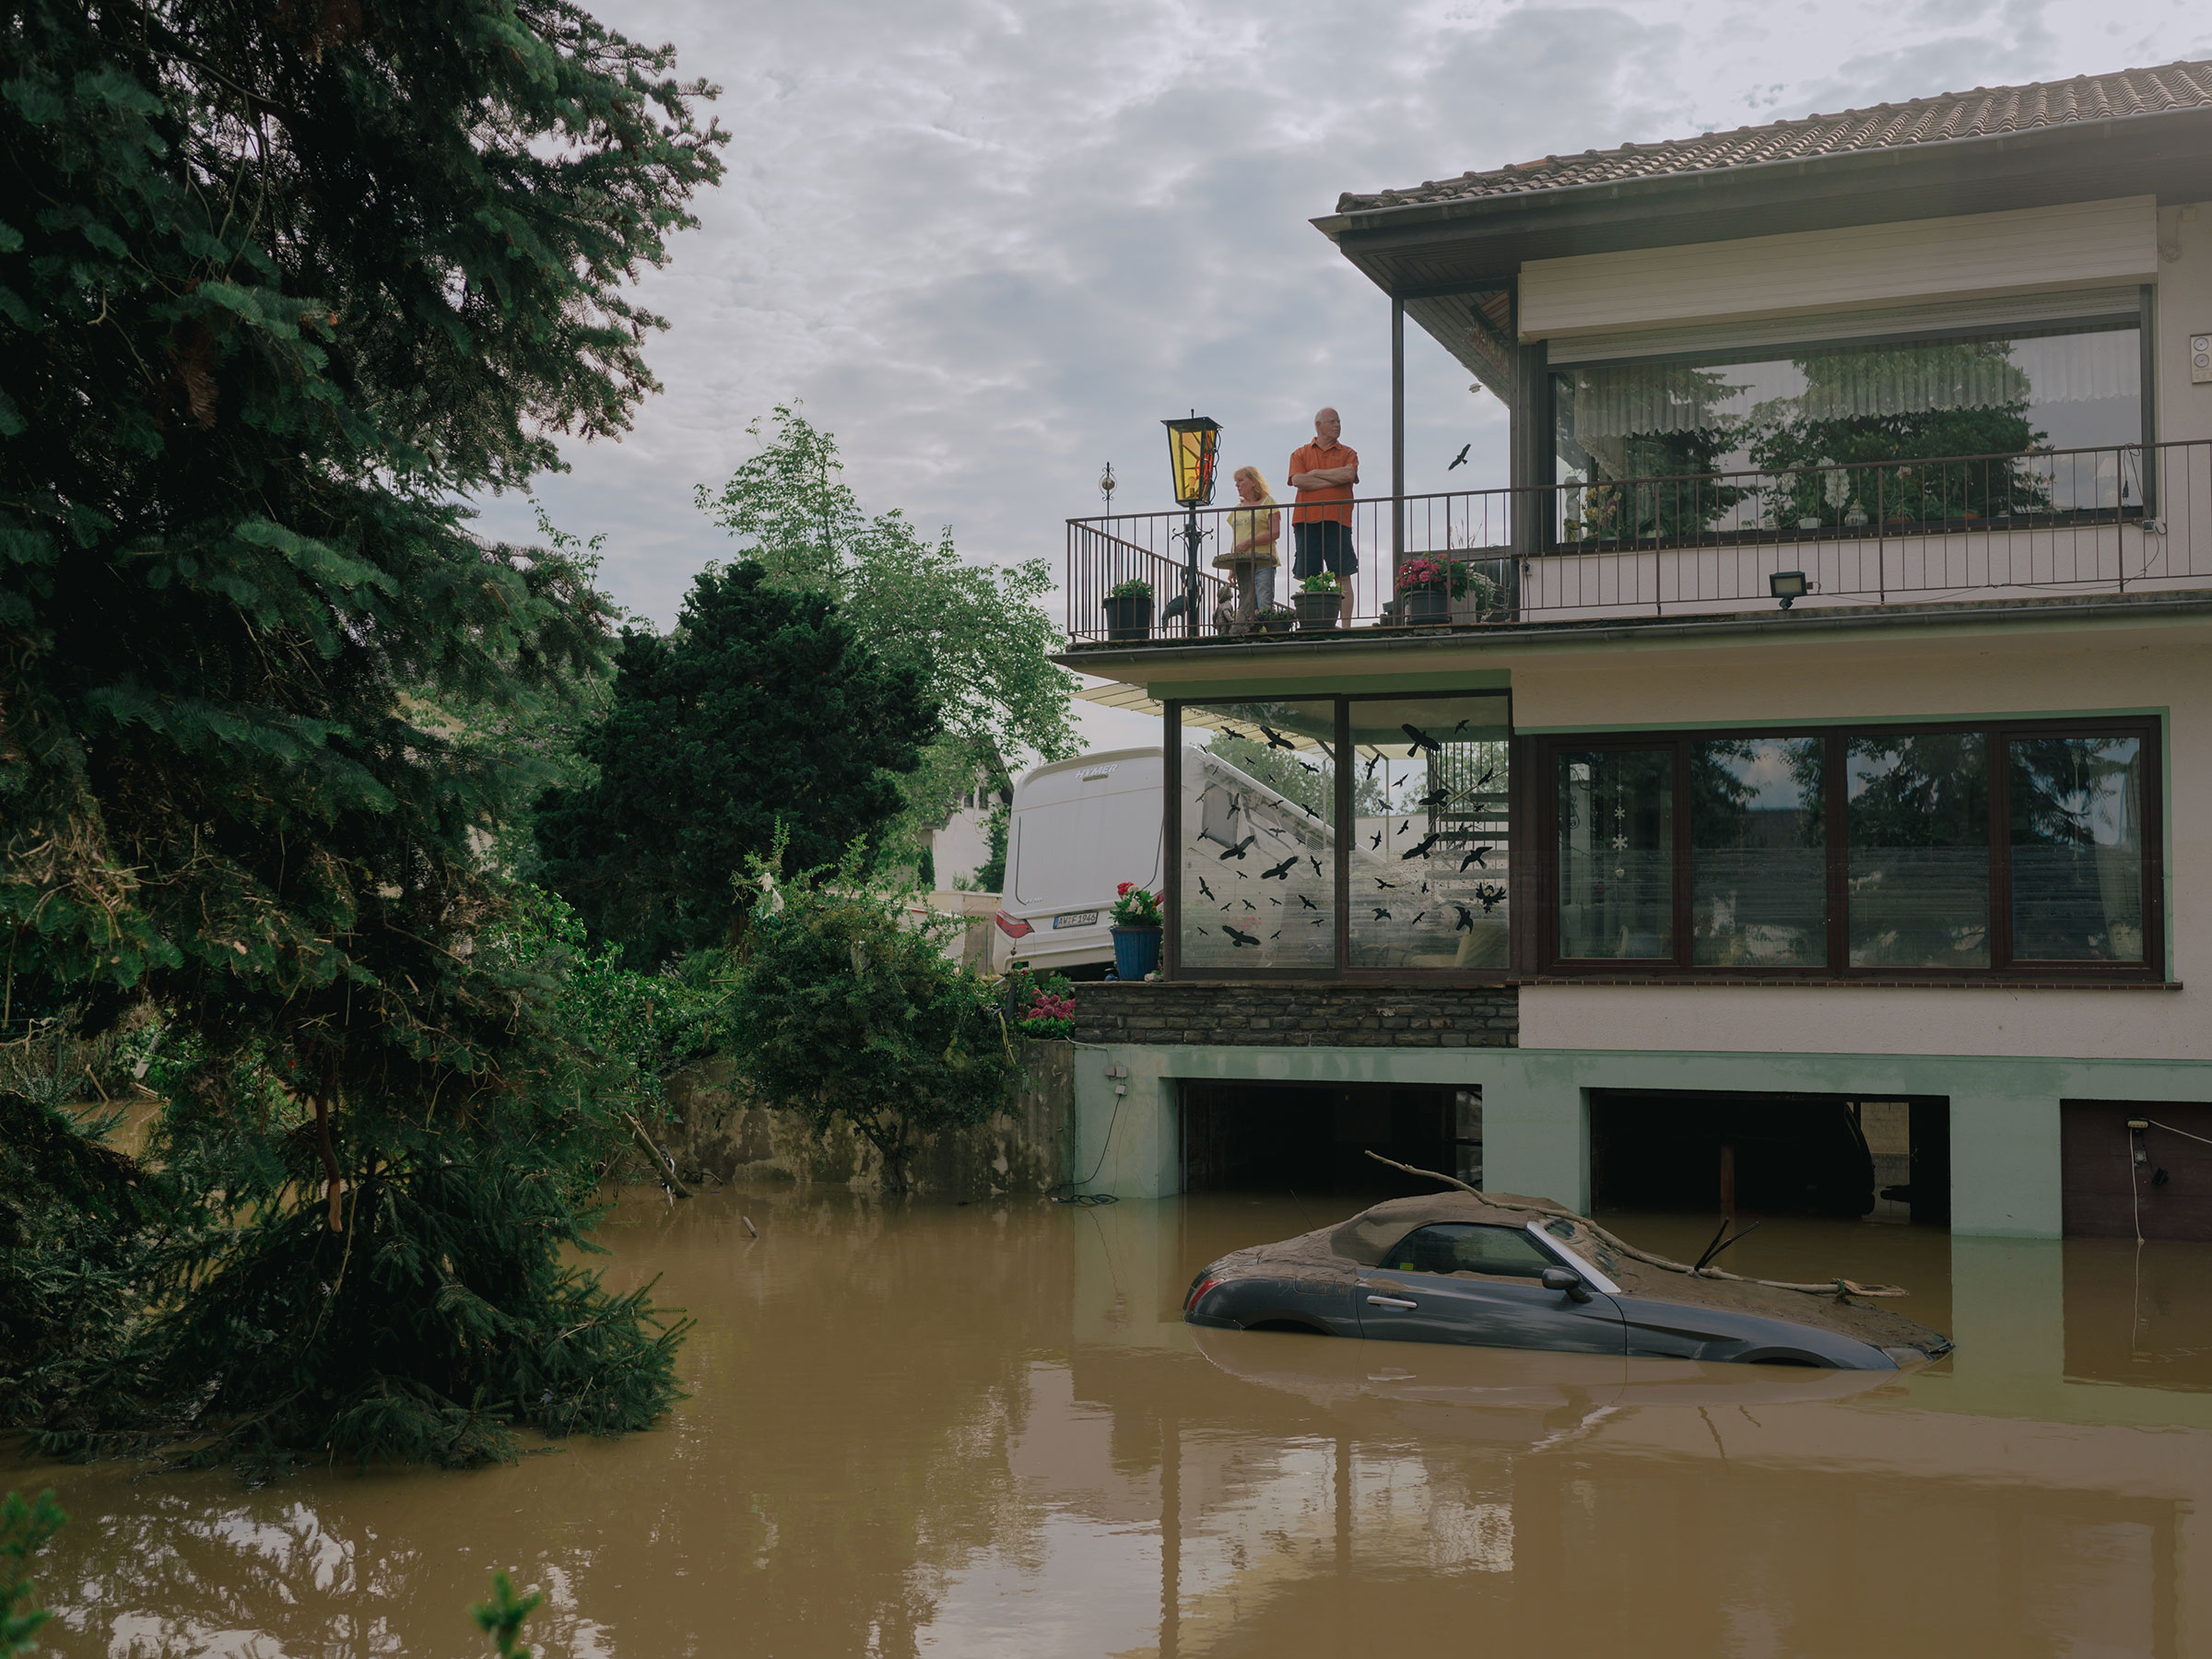 People stand on a balcony above the floodwaters in Ahrweiler, Germany, July 15, 2021. (DOCKS Collective)